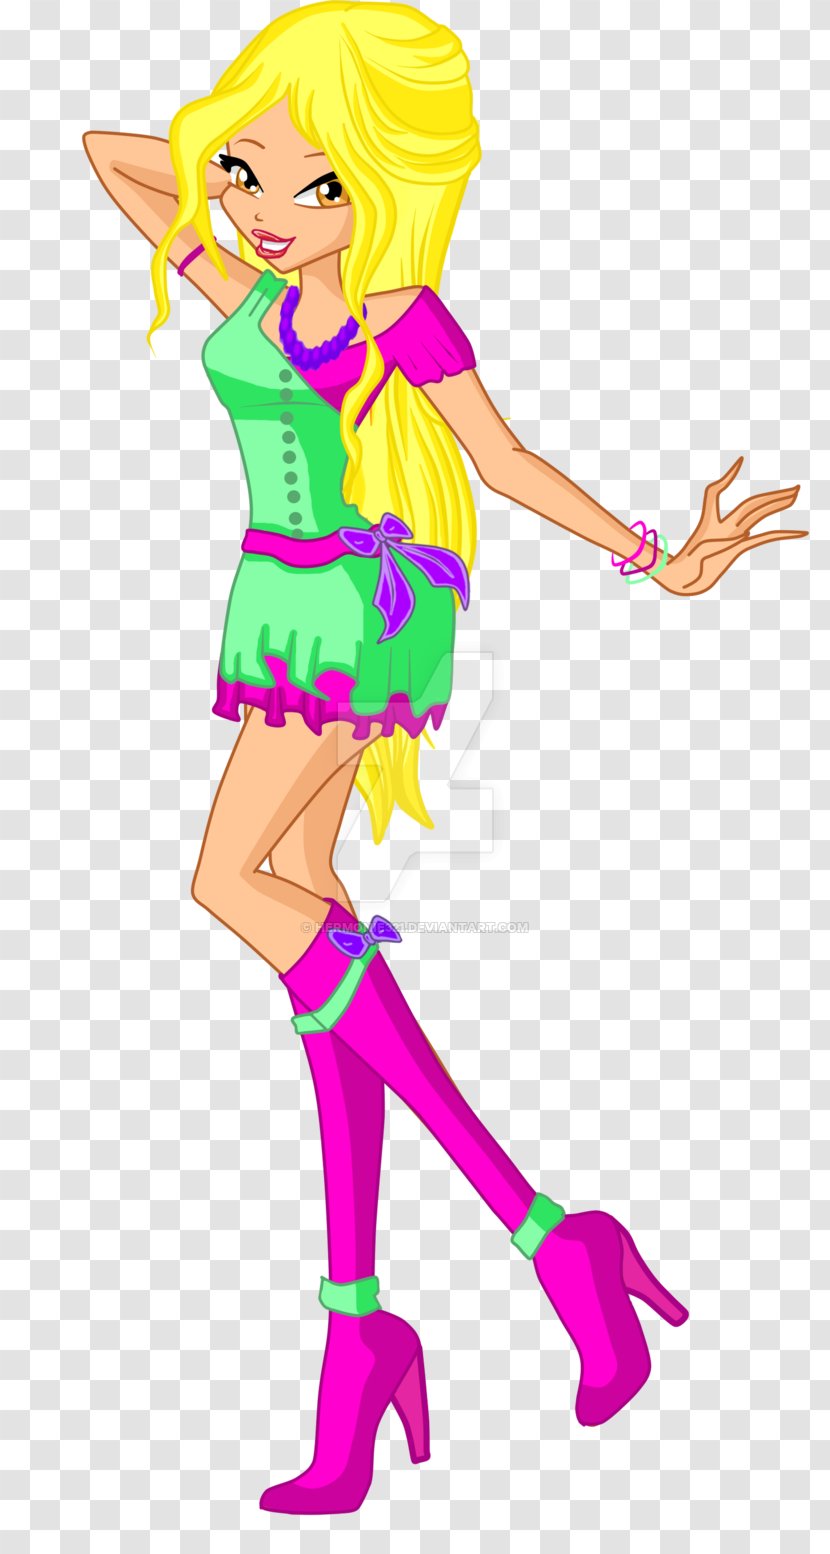 Green Fairy Costume Clip Art - Tree Transparent PNG